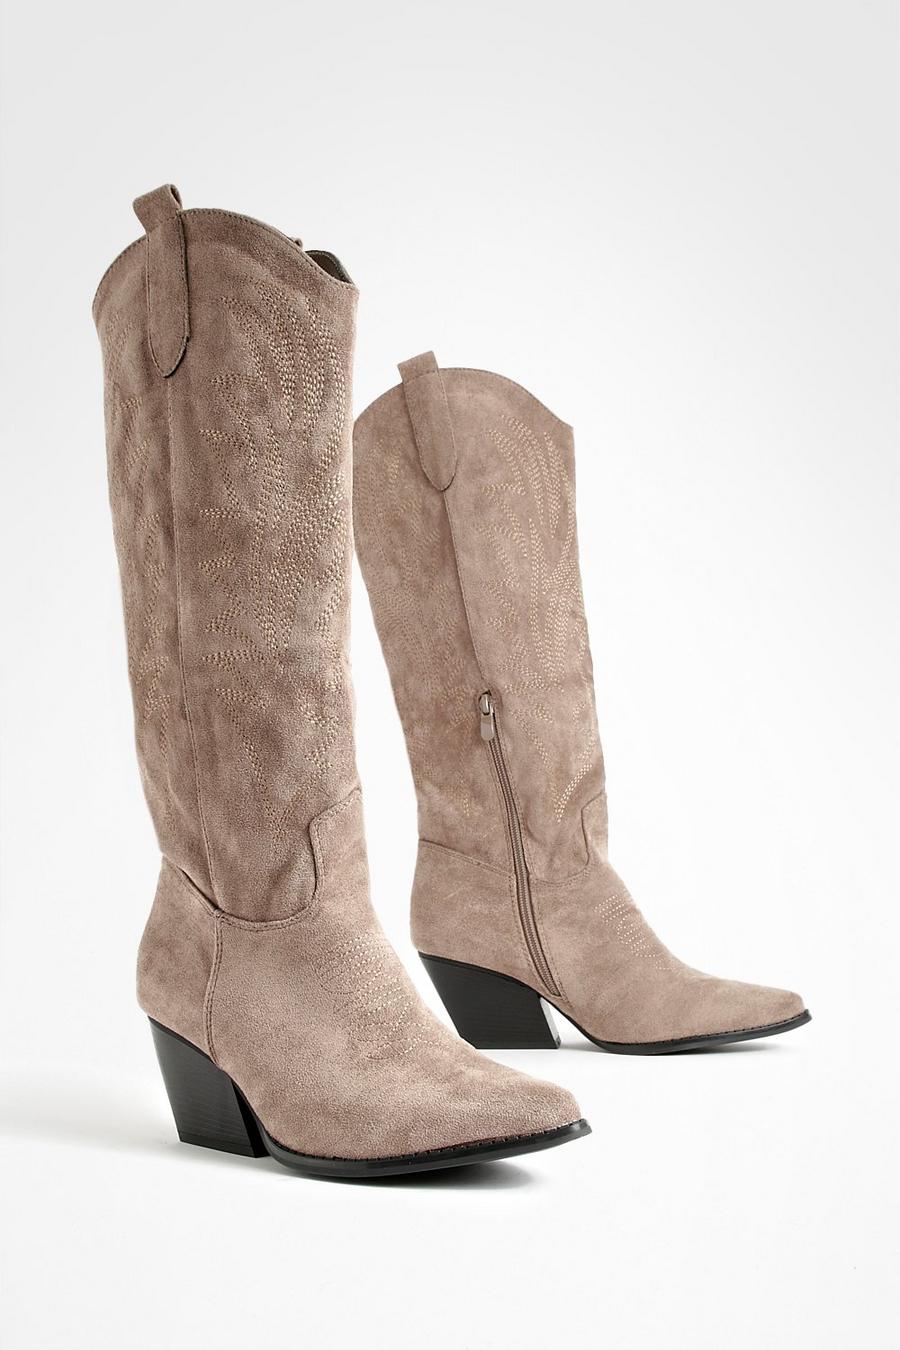 Taupe Embroidered Knee High Western Cowboy Boots  